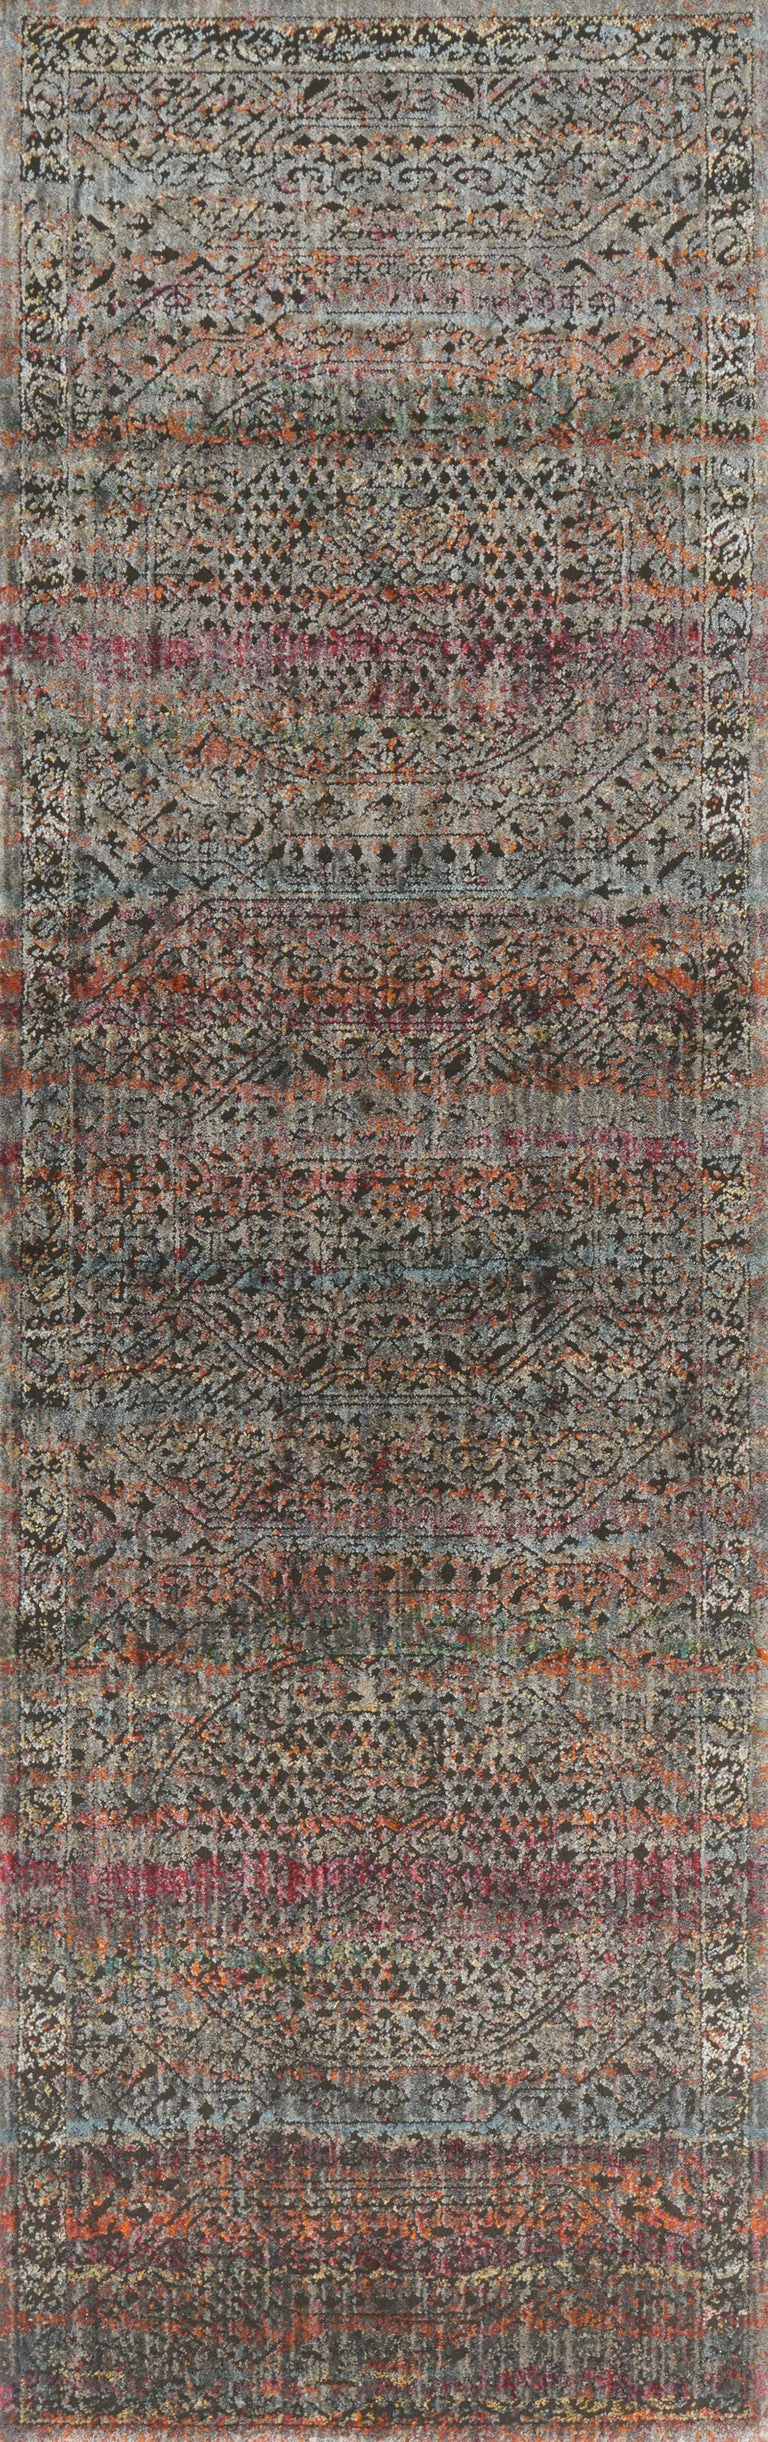 Loloi Rugs Javari Collection Rug in Charcoal, Sunset - 6'7" x 9'4"